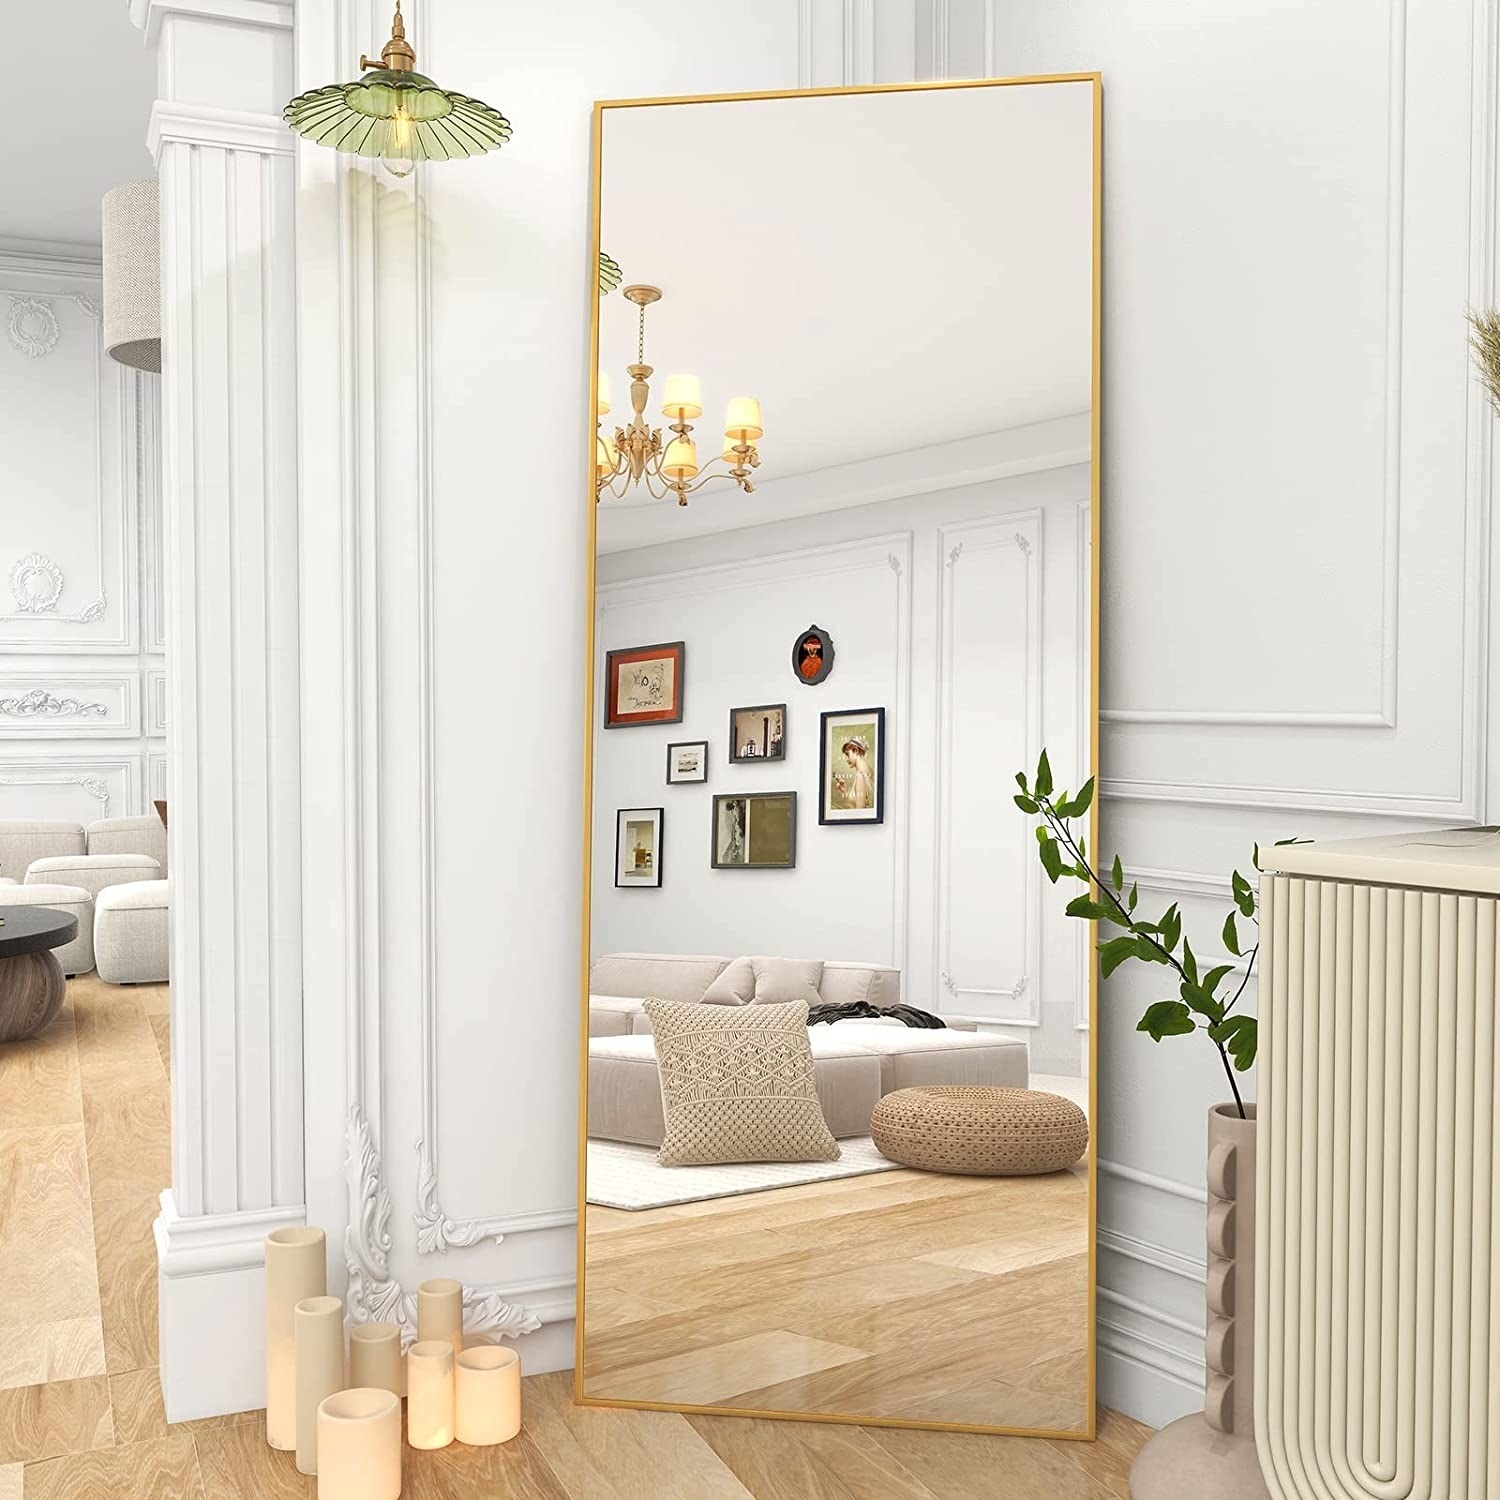 the gold rectangular mirror leaning against a wall